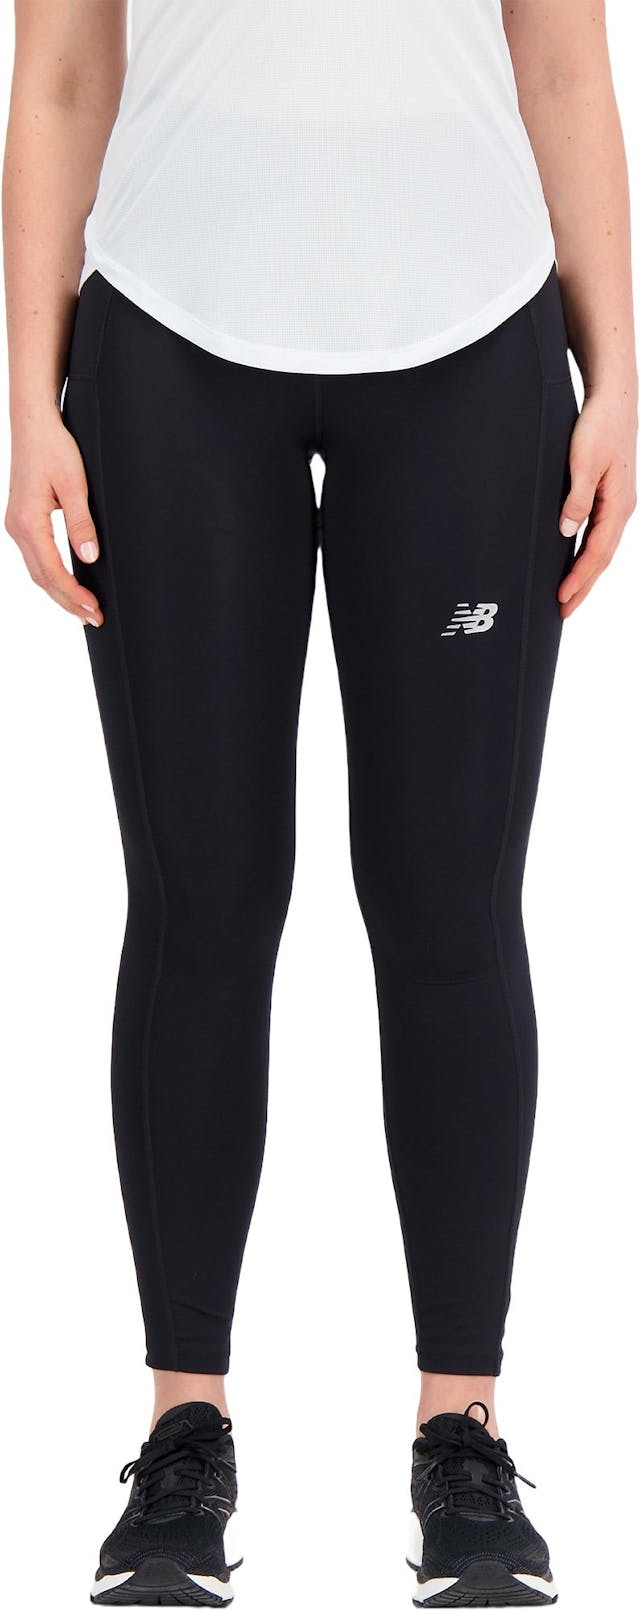 Product image for Accelerate Pacer Tight - Women's